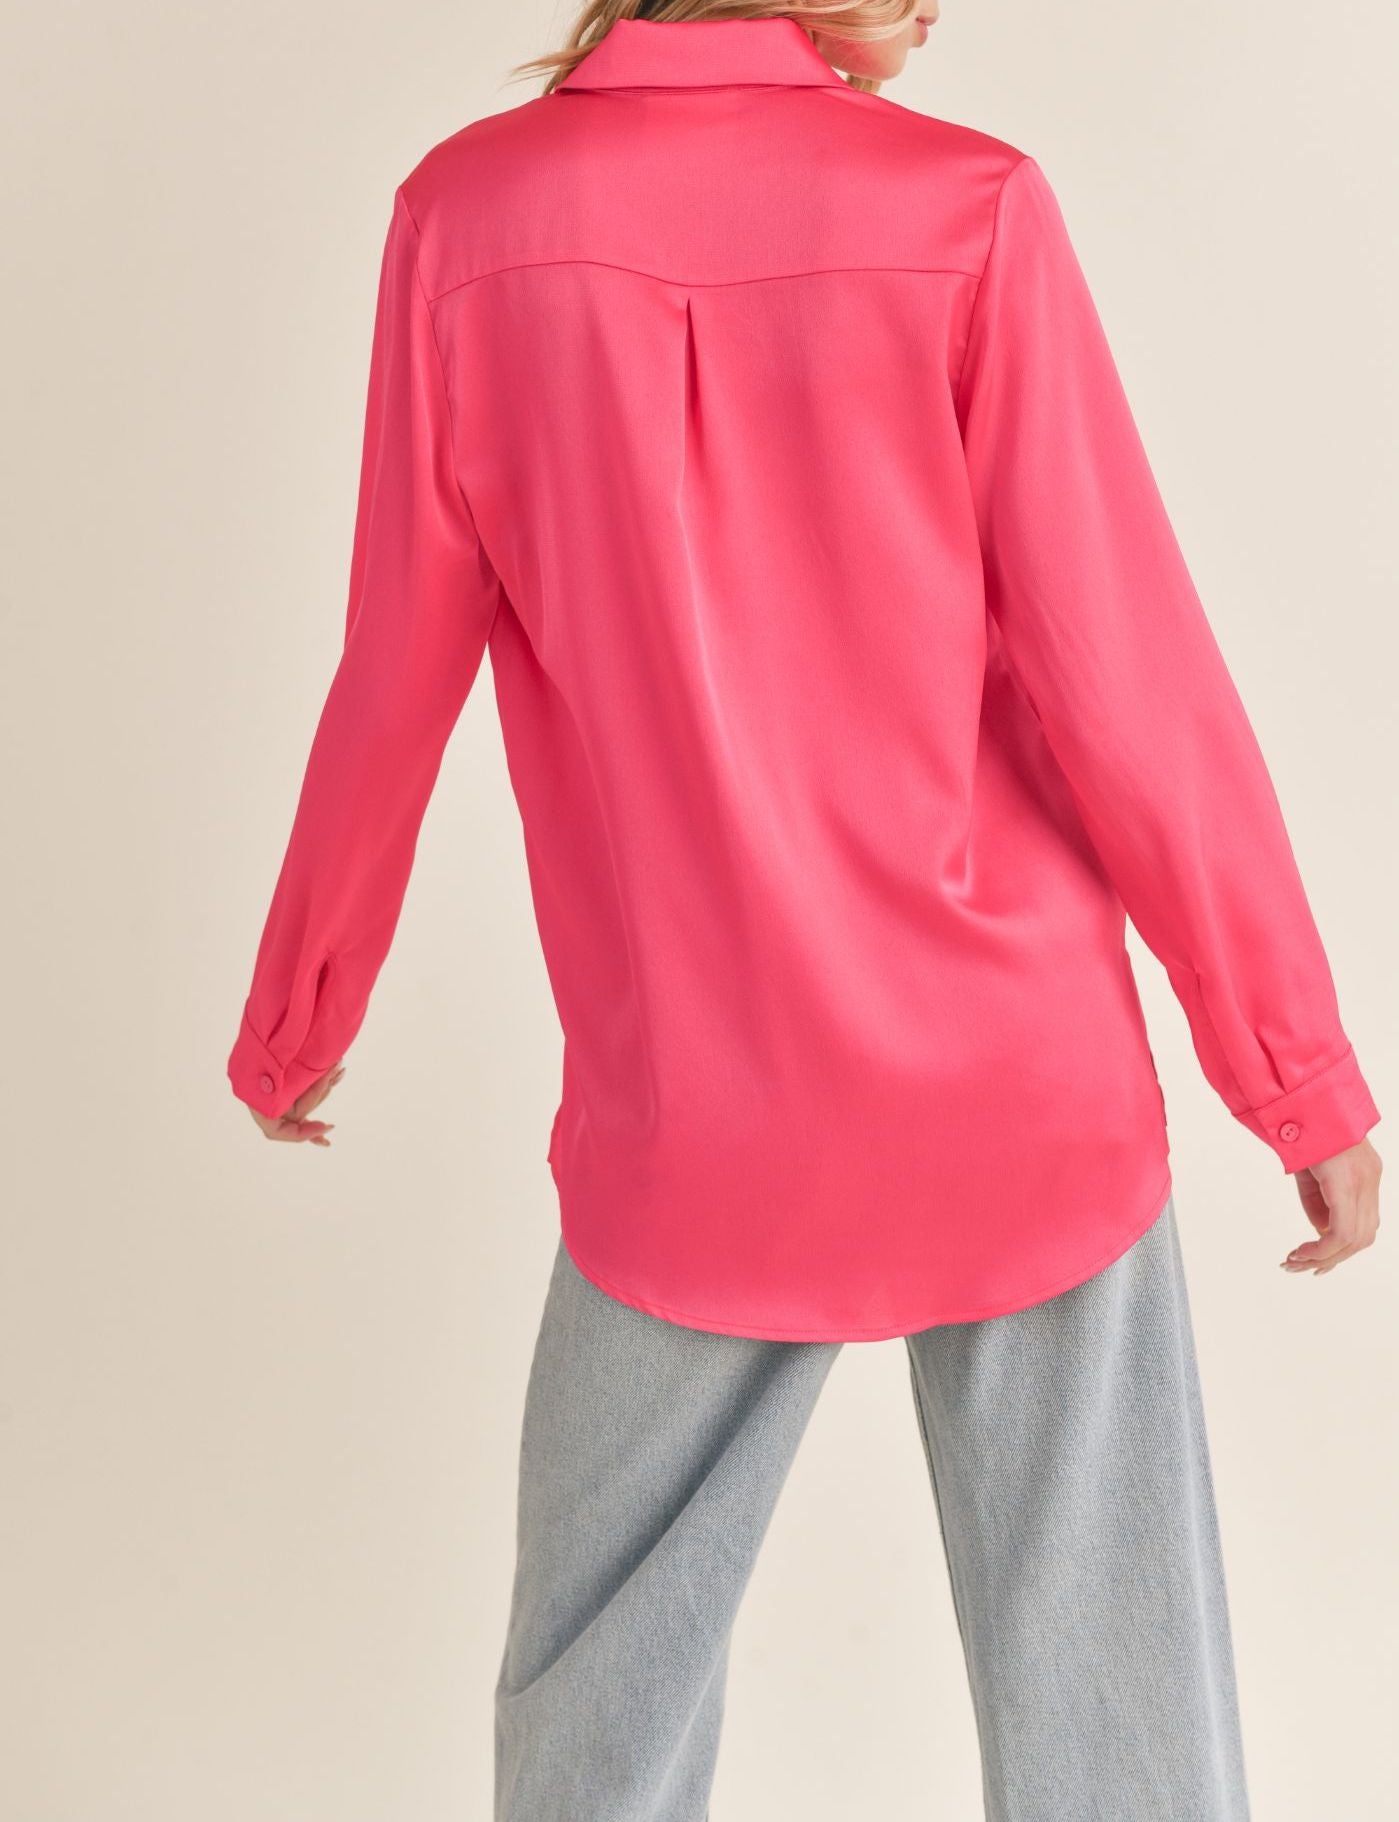 Dream of Me Hot Pink Silk Button Down Top